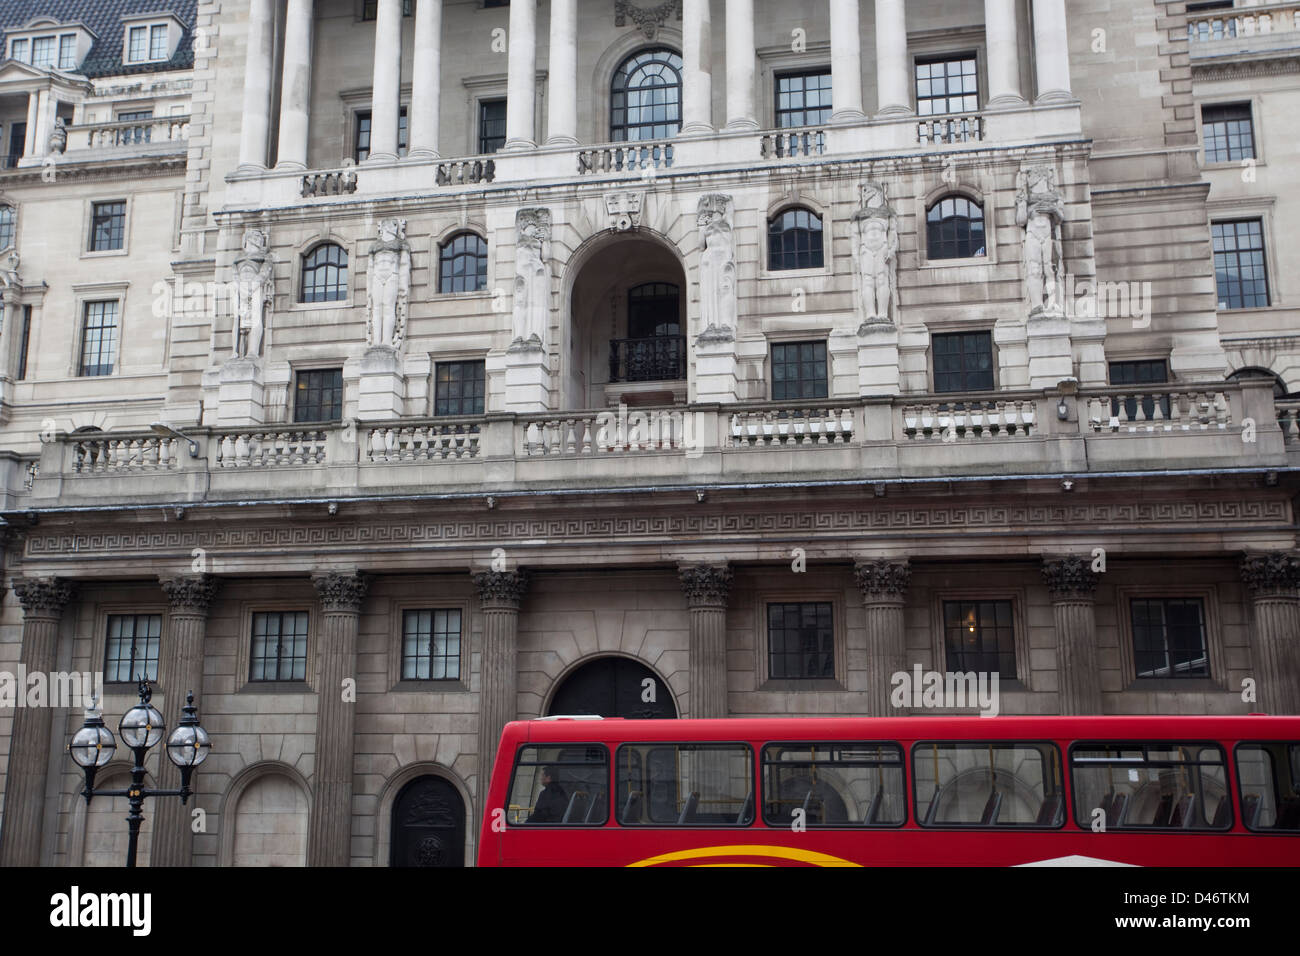 Traditional red double decker bus with London architecture in the background. Stock Photo